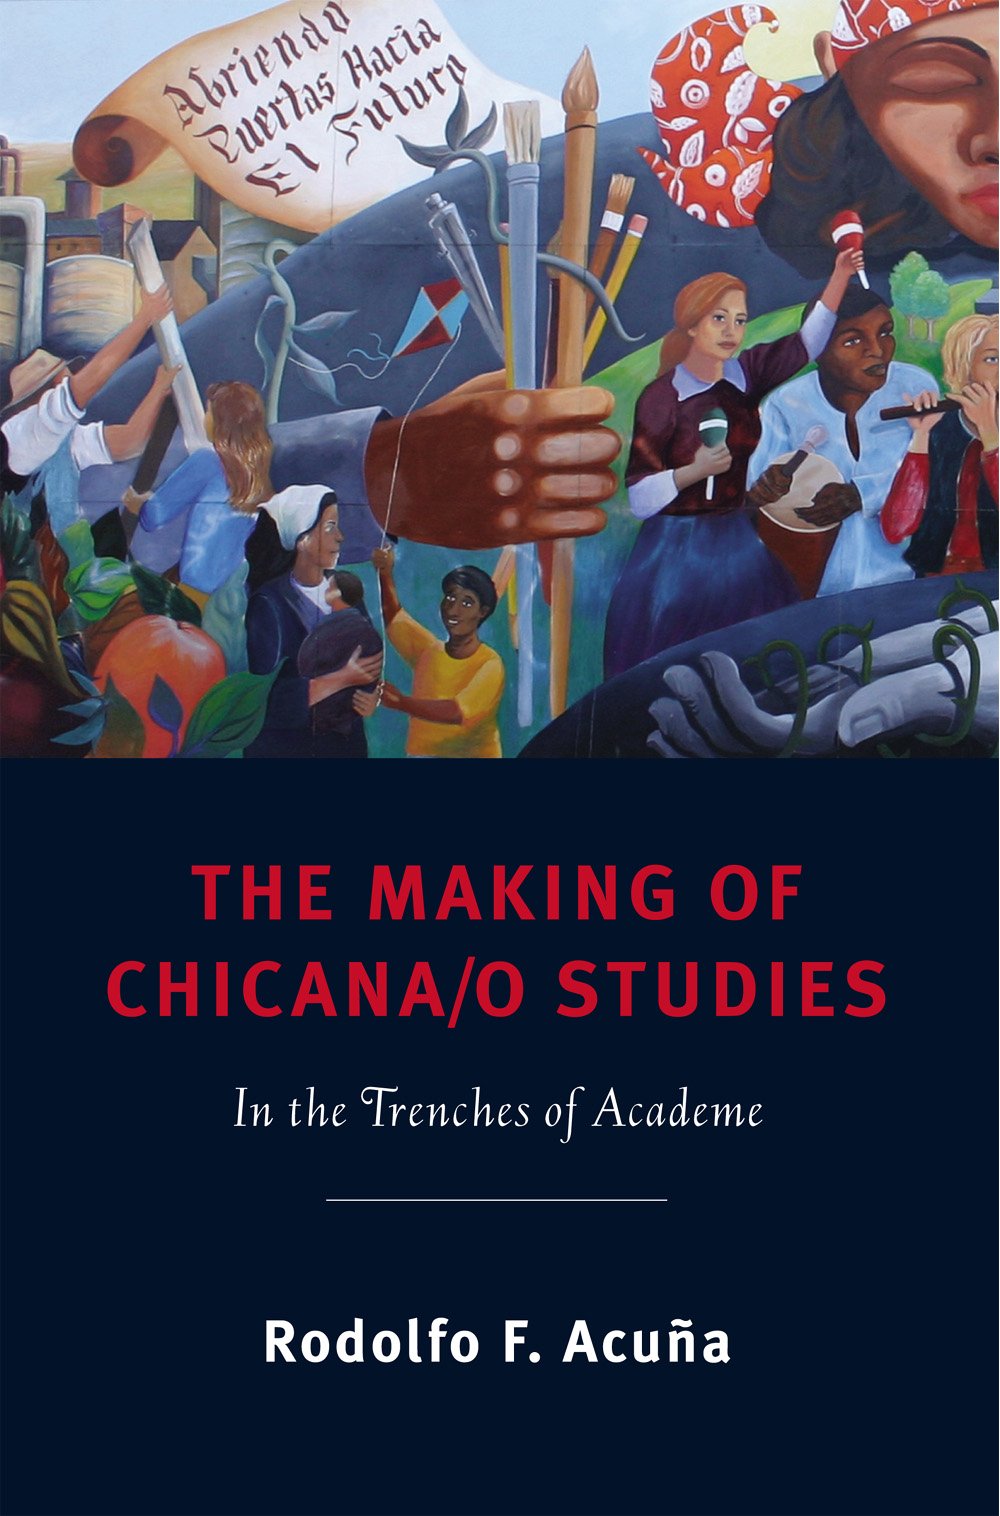 The Making of Chicana/o Studies: In the Trenches of Academe by Rodolfo F. Acuña